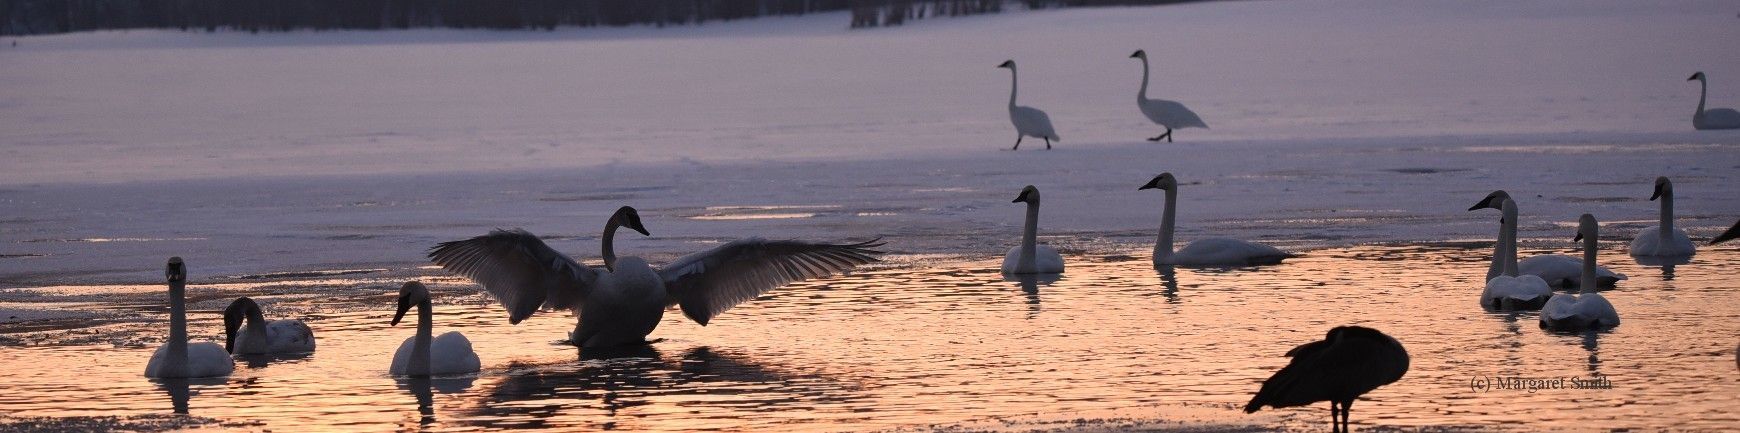 Trumpeter Swans in winter at sunset